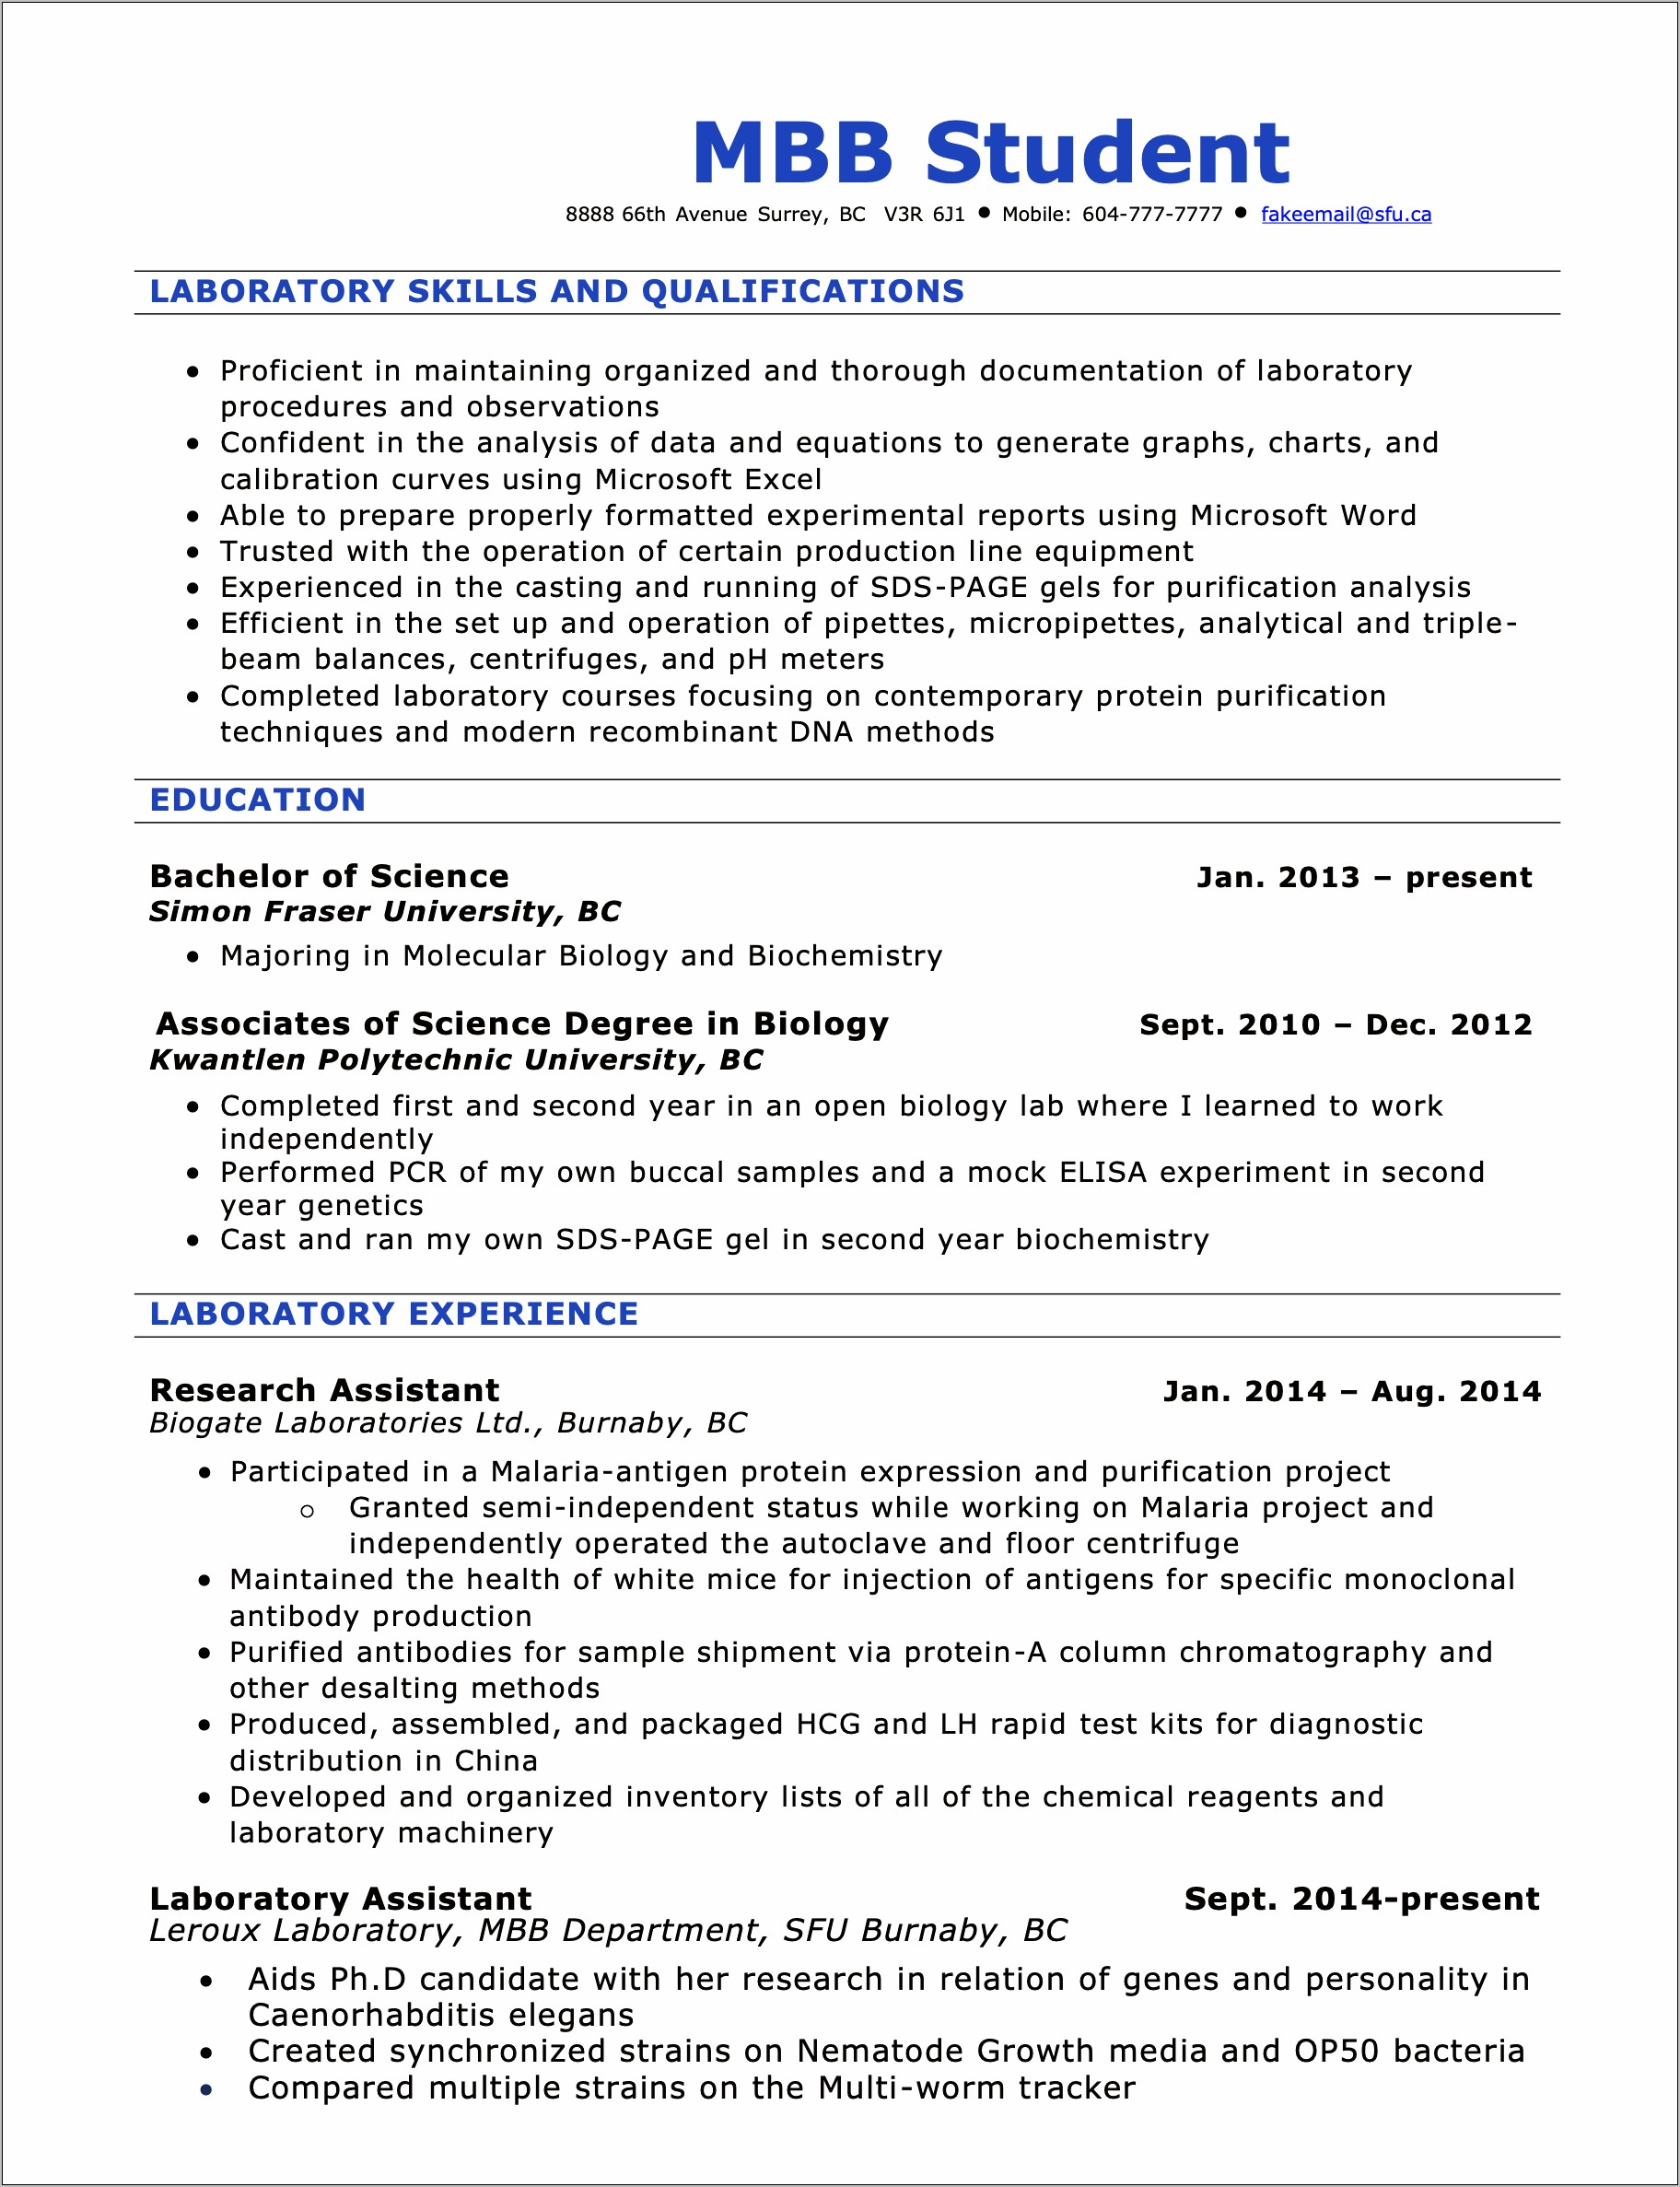 Skills Section Of Resume For Biochemsirty